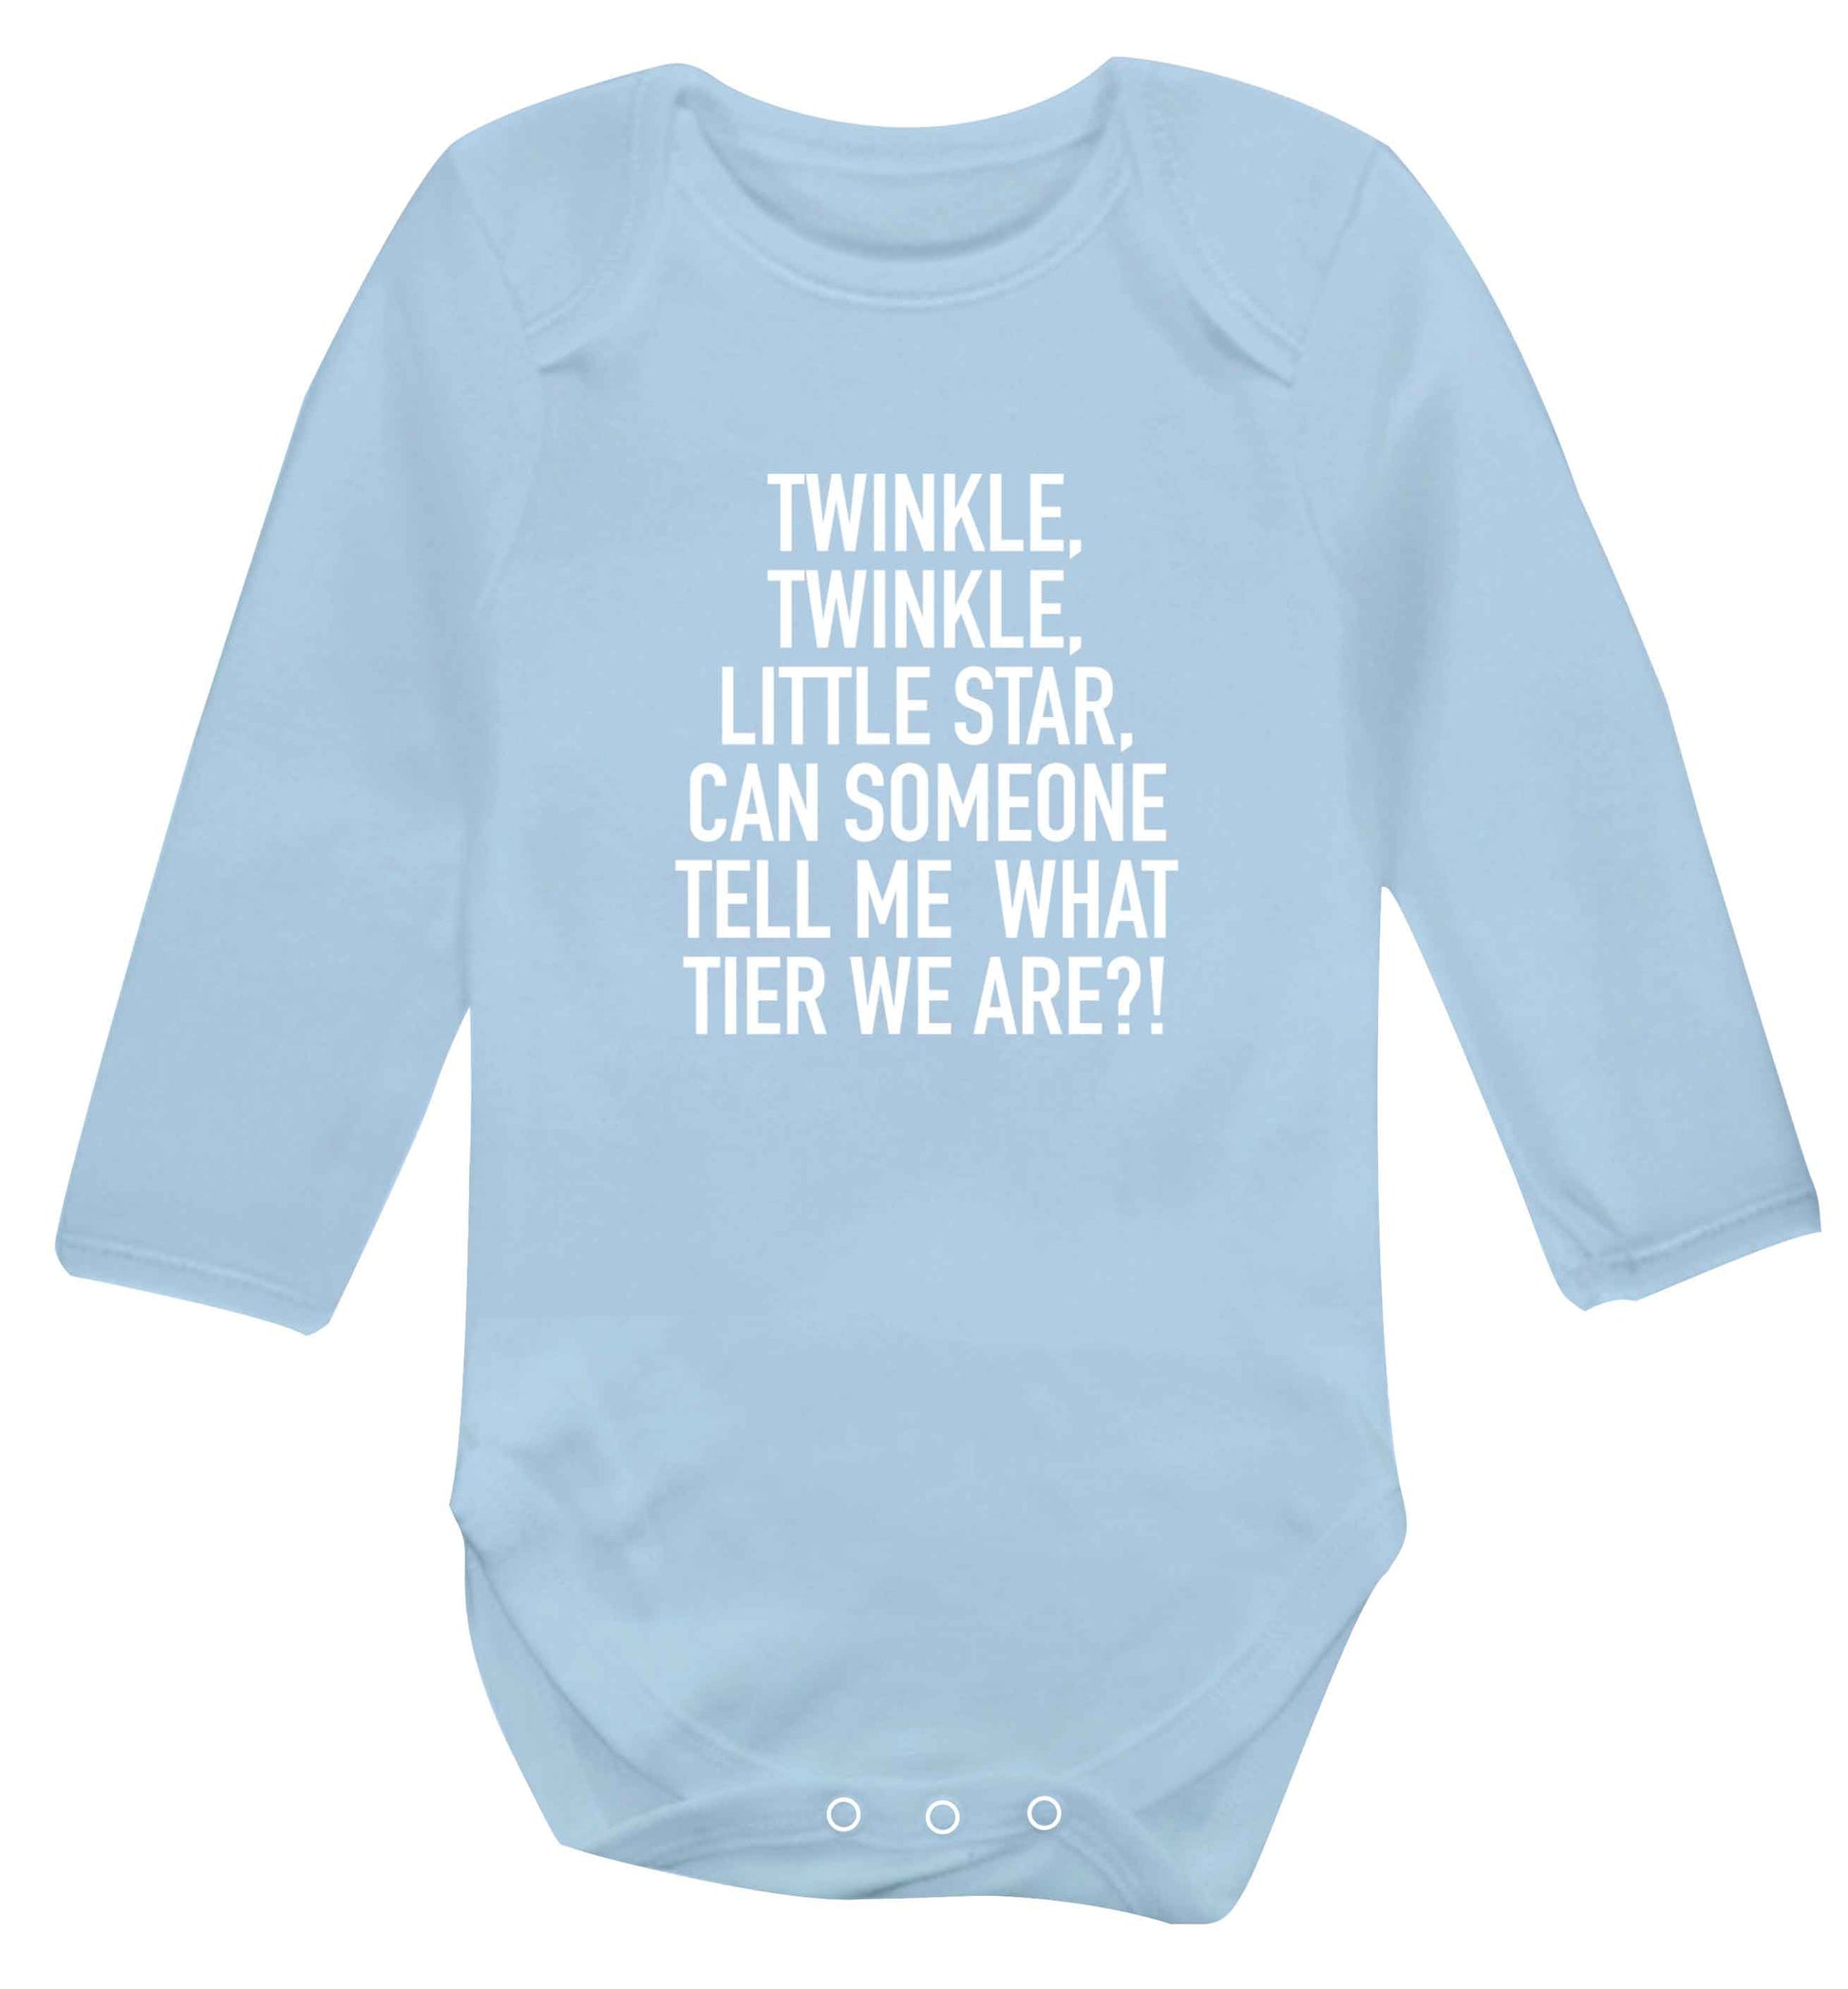 Twinkle twinkle, little star does anyone know what tier we are? baby vest long sleeved pale blue 6-12 months